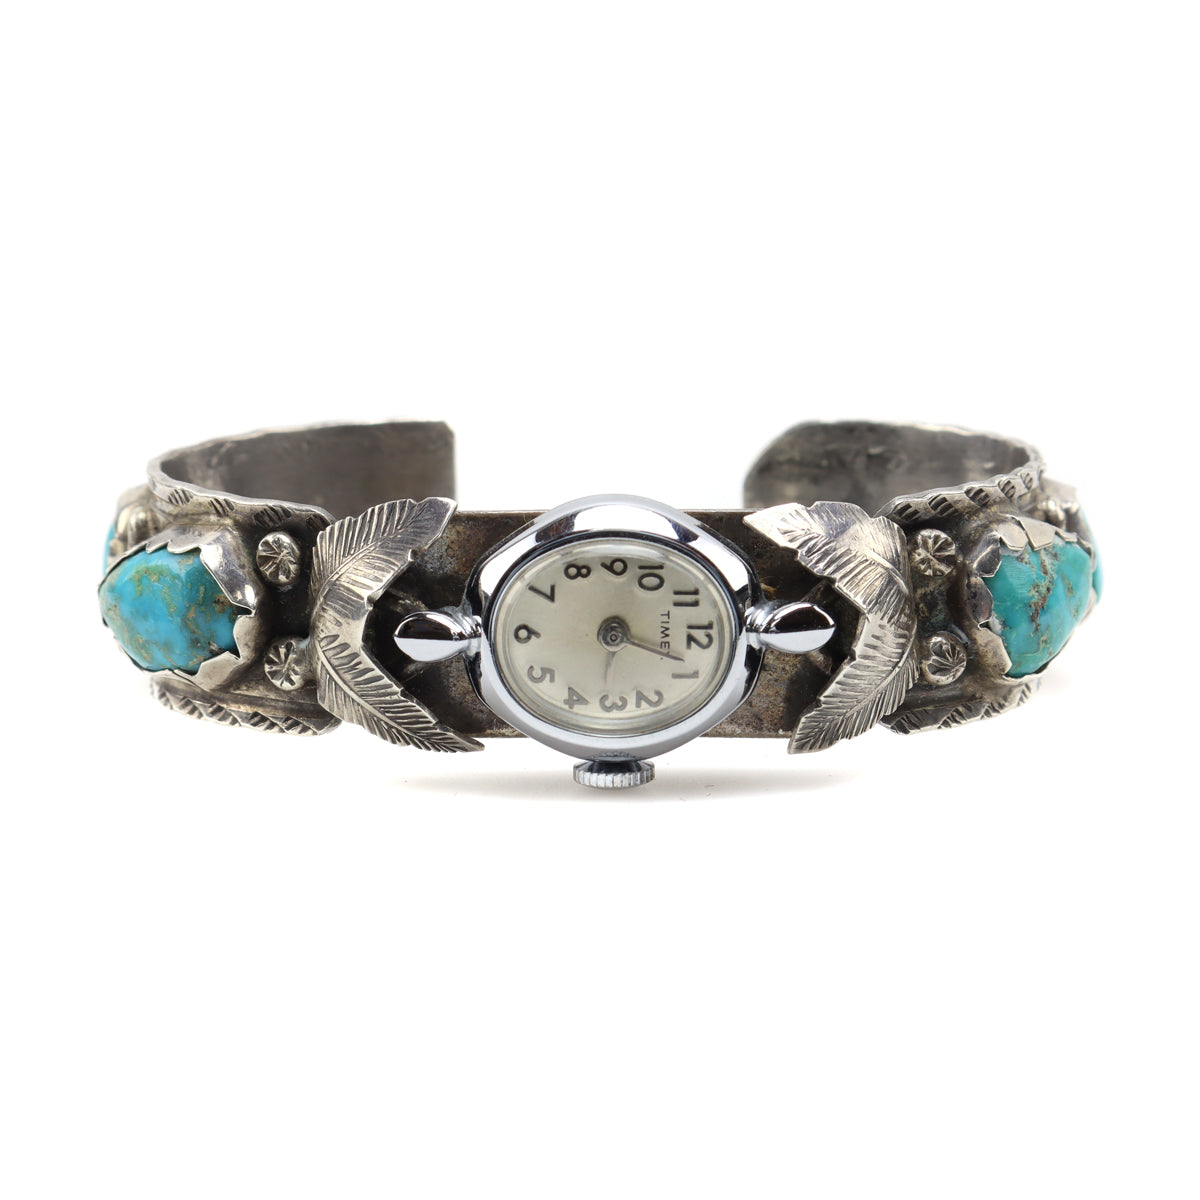 Navajo Turquoise and Silver Watch Band with Floral Design c. 1960-70s, size 5.75 (J12980) 1
